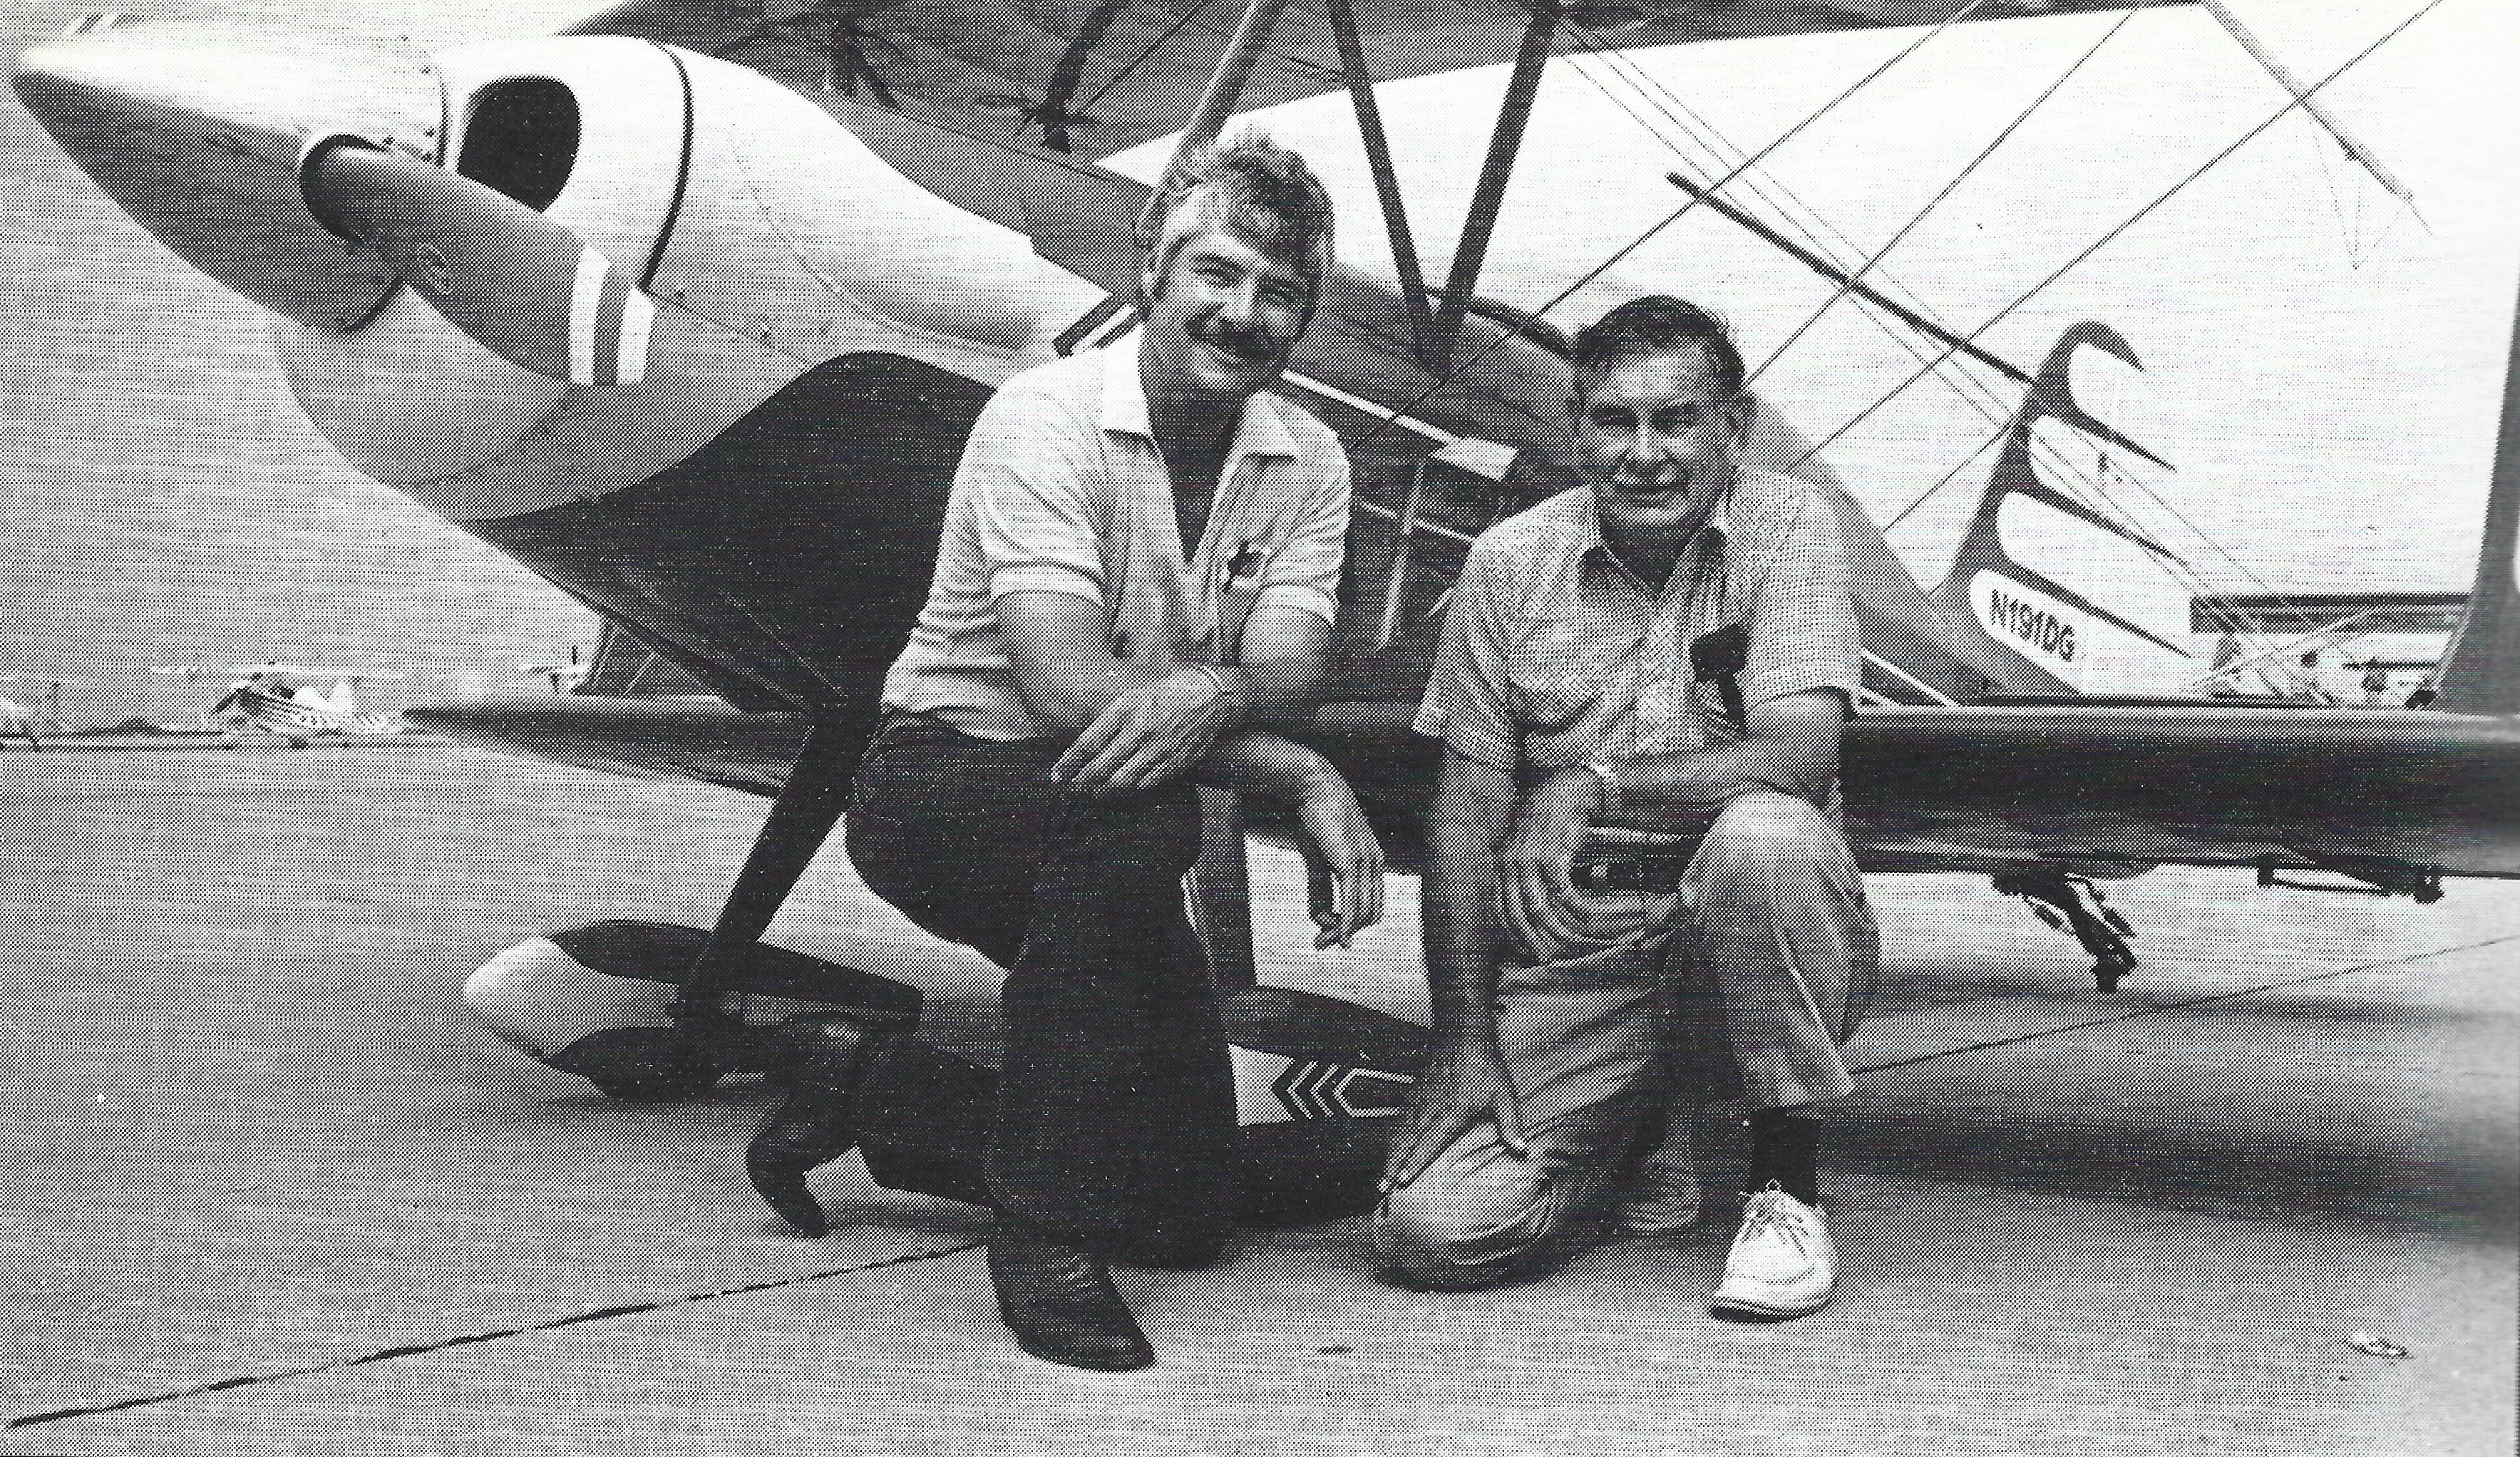 Dick and Tom Green with N191DG